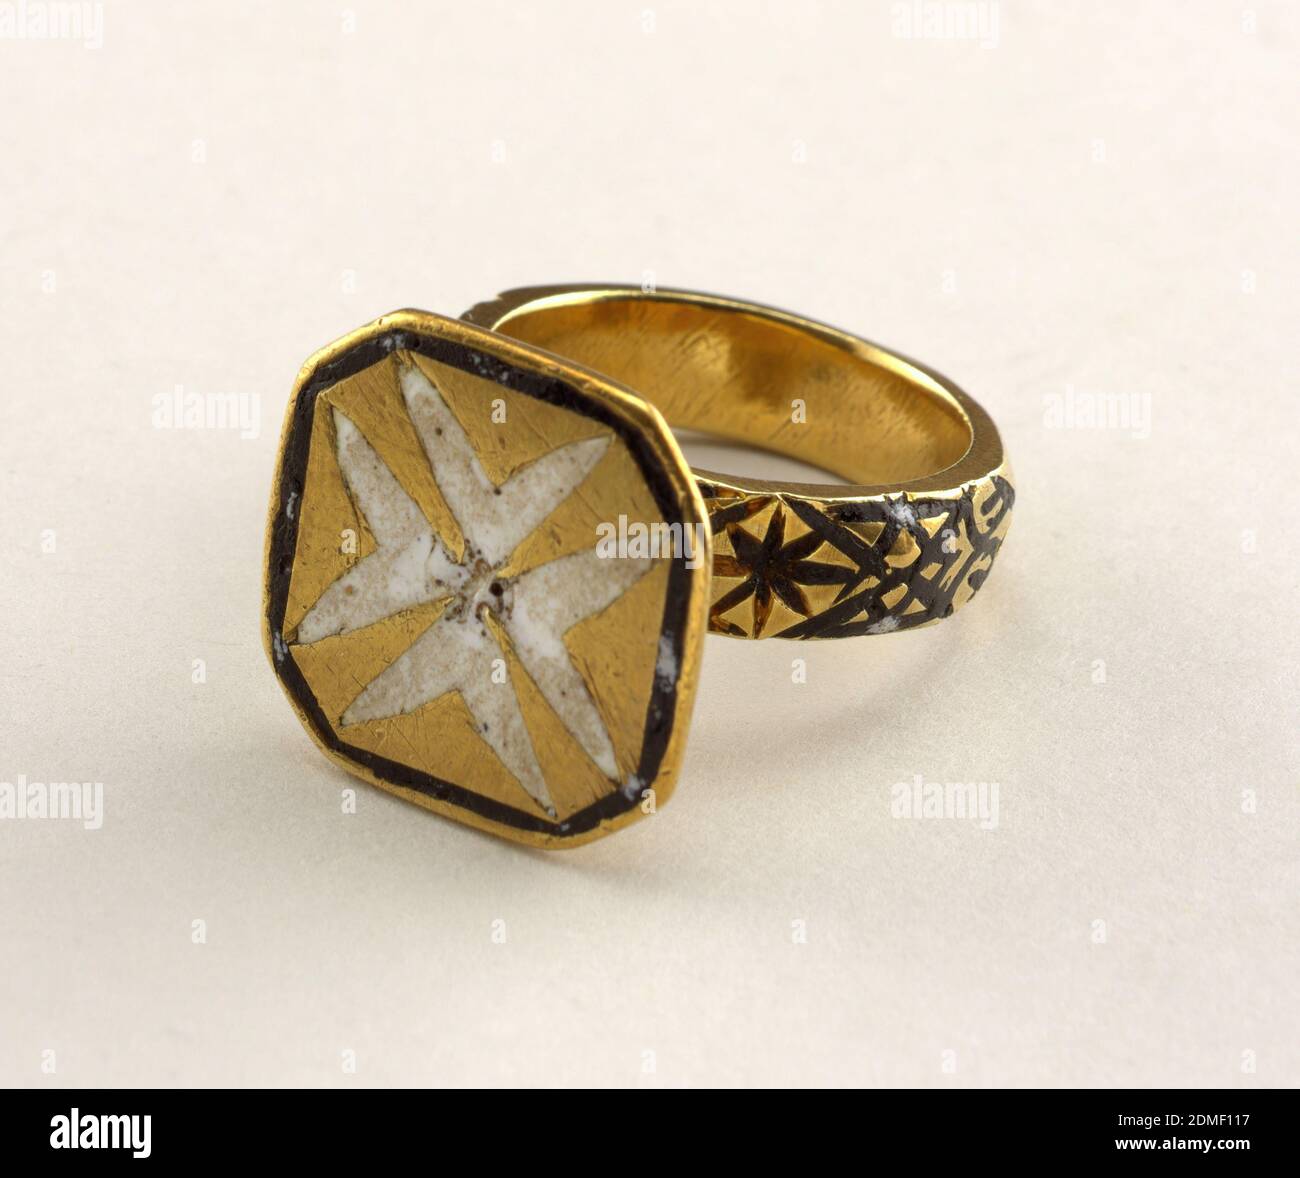 Ring with seal, Gold, enamel, France or Italy, probably 16th century, jewelry, Decorative Arts, Ring with seal Stock Photo